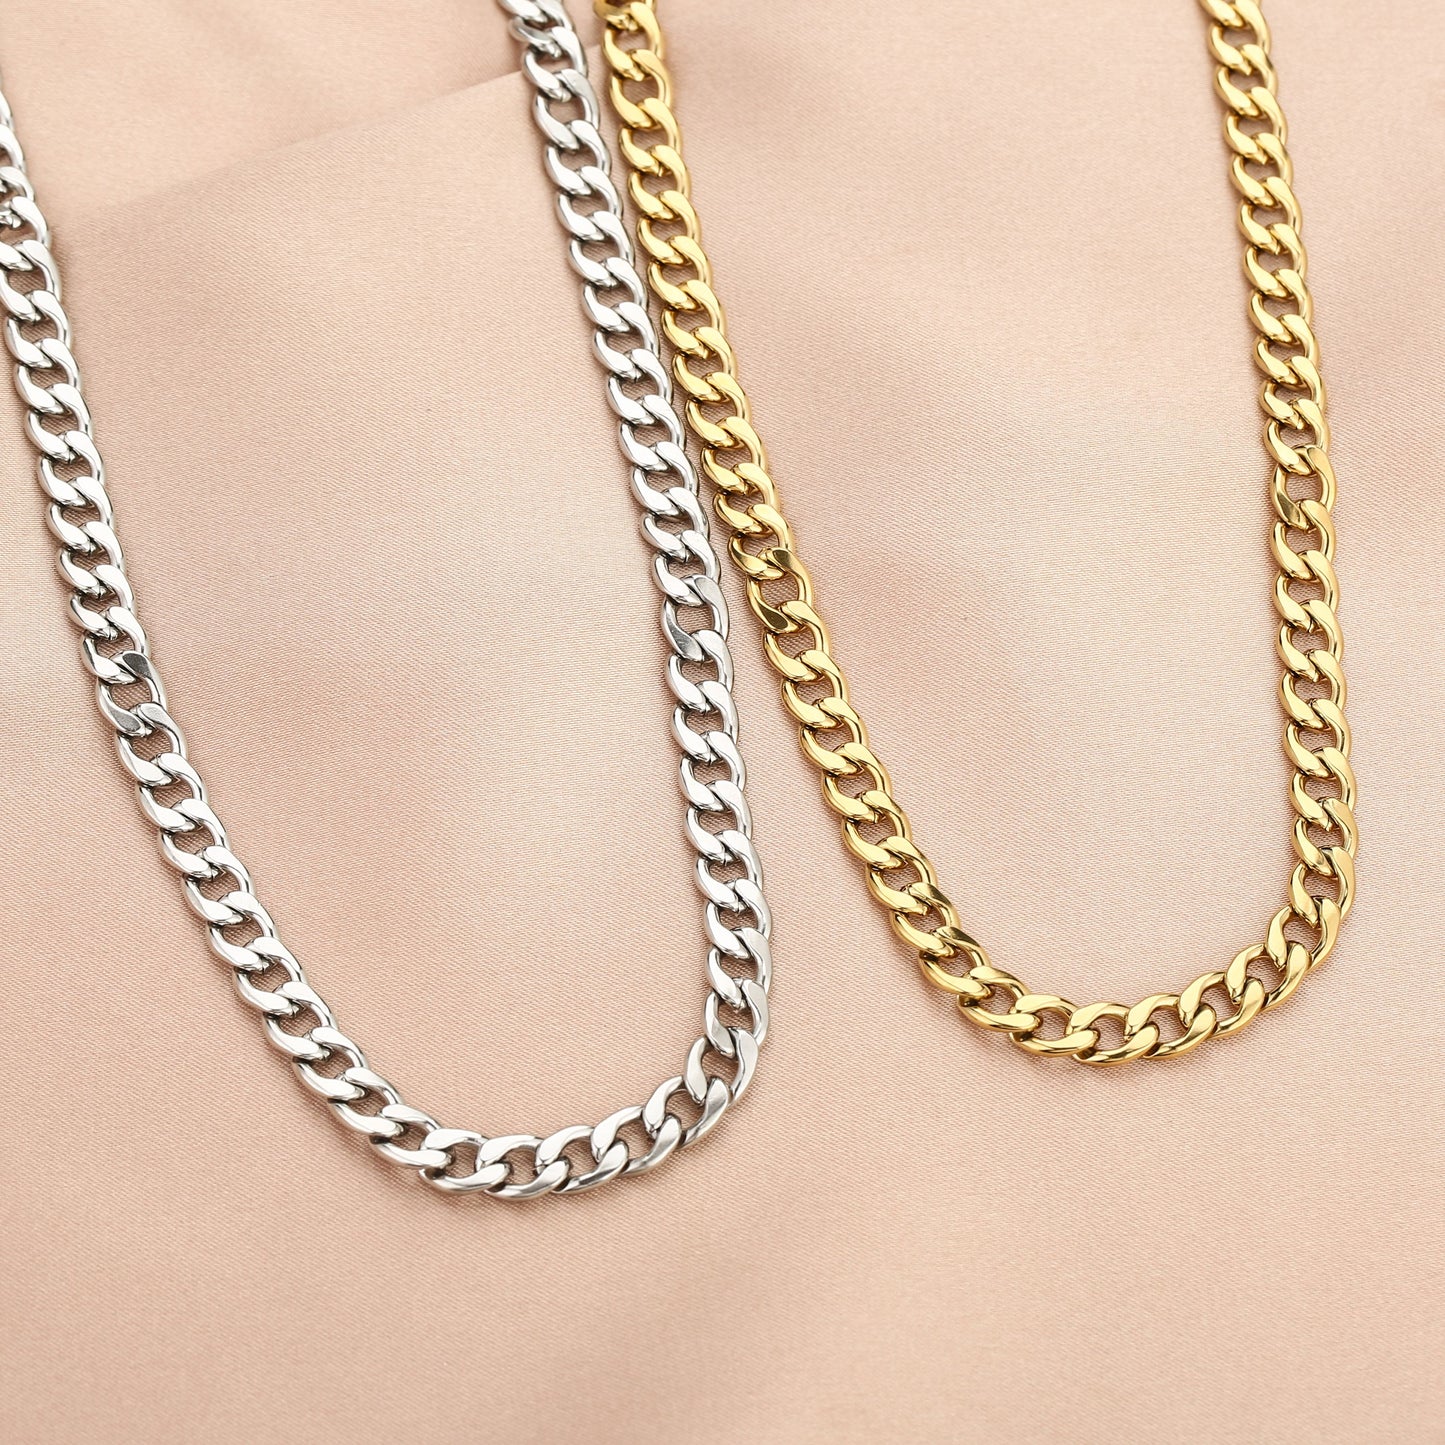 Chain 3.0 Necklace Silver